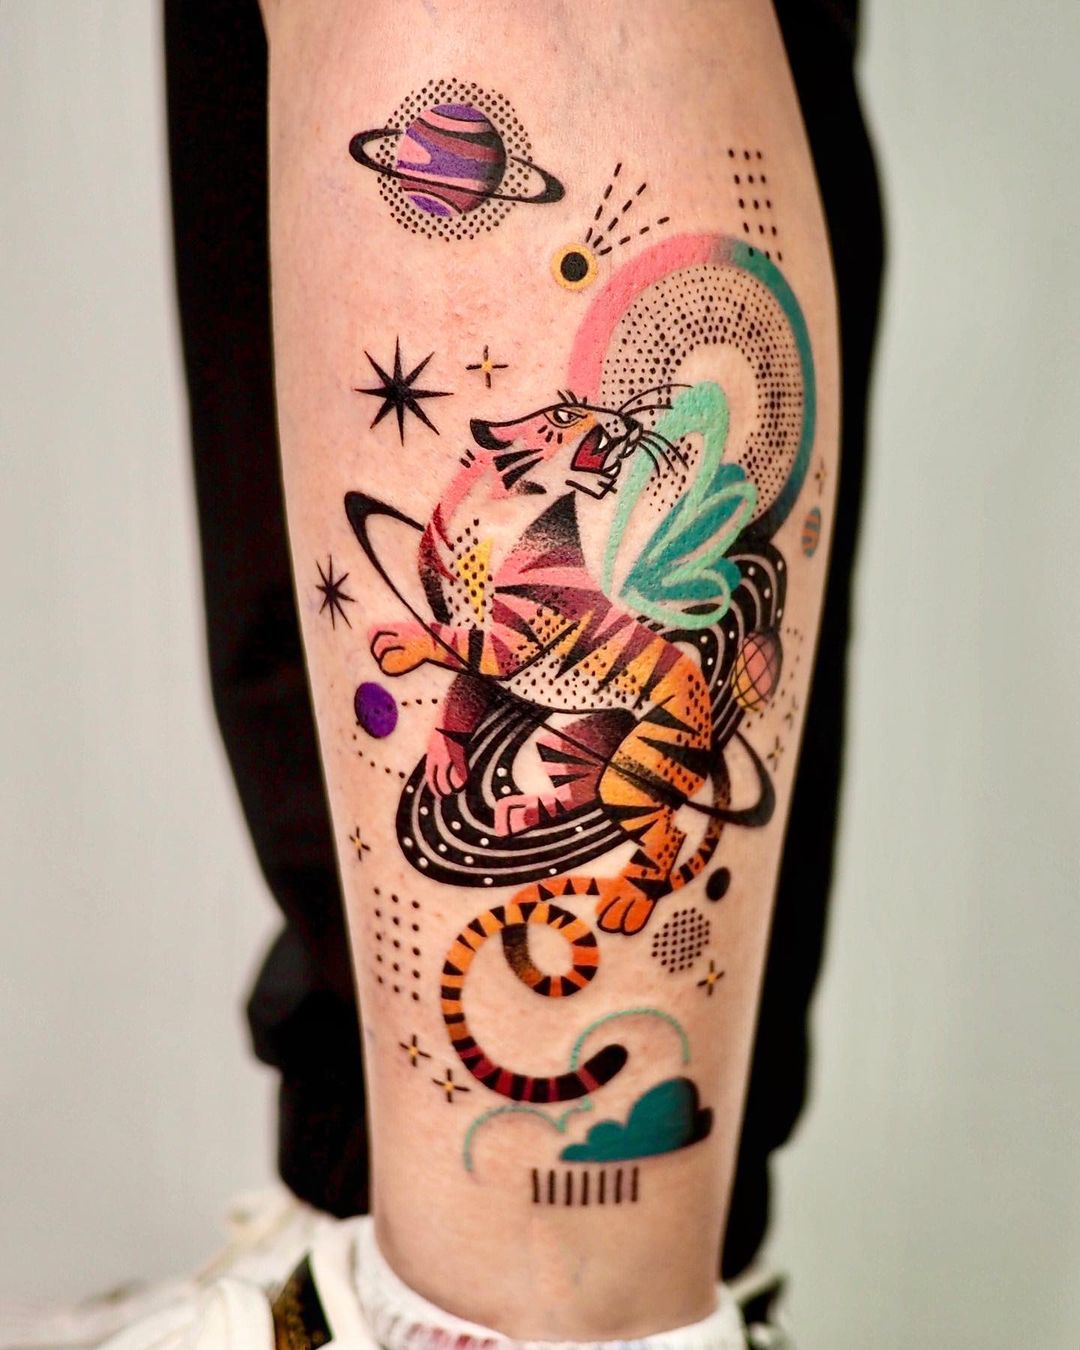 tiger; Artist creates beautiful tattoos that will captivate you with the naked eye